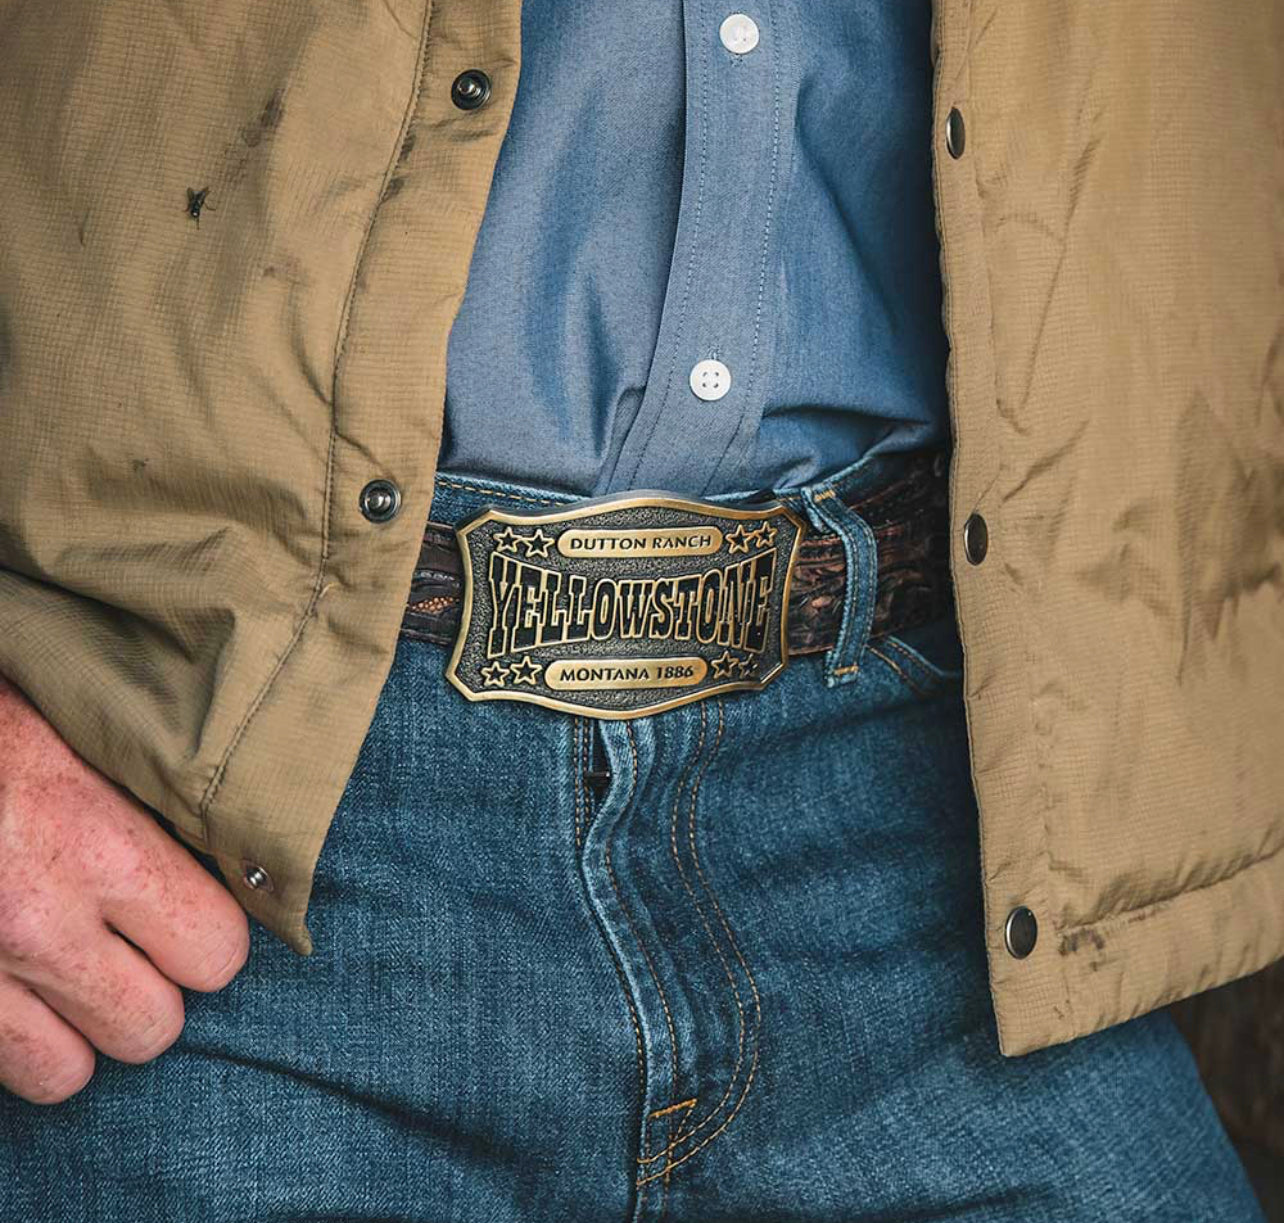 The Y yellowstone buckle